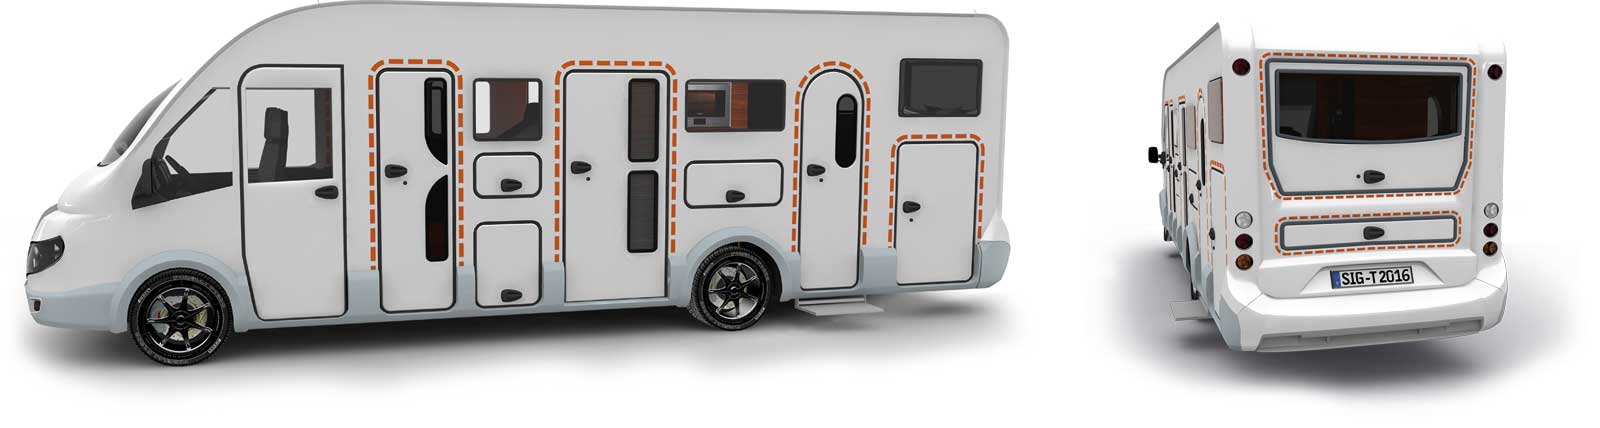 Satisfied tegos customers with Chausson caravans and RVs